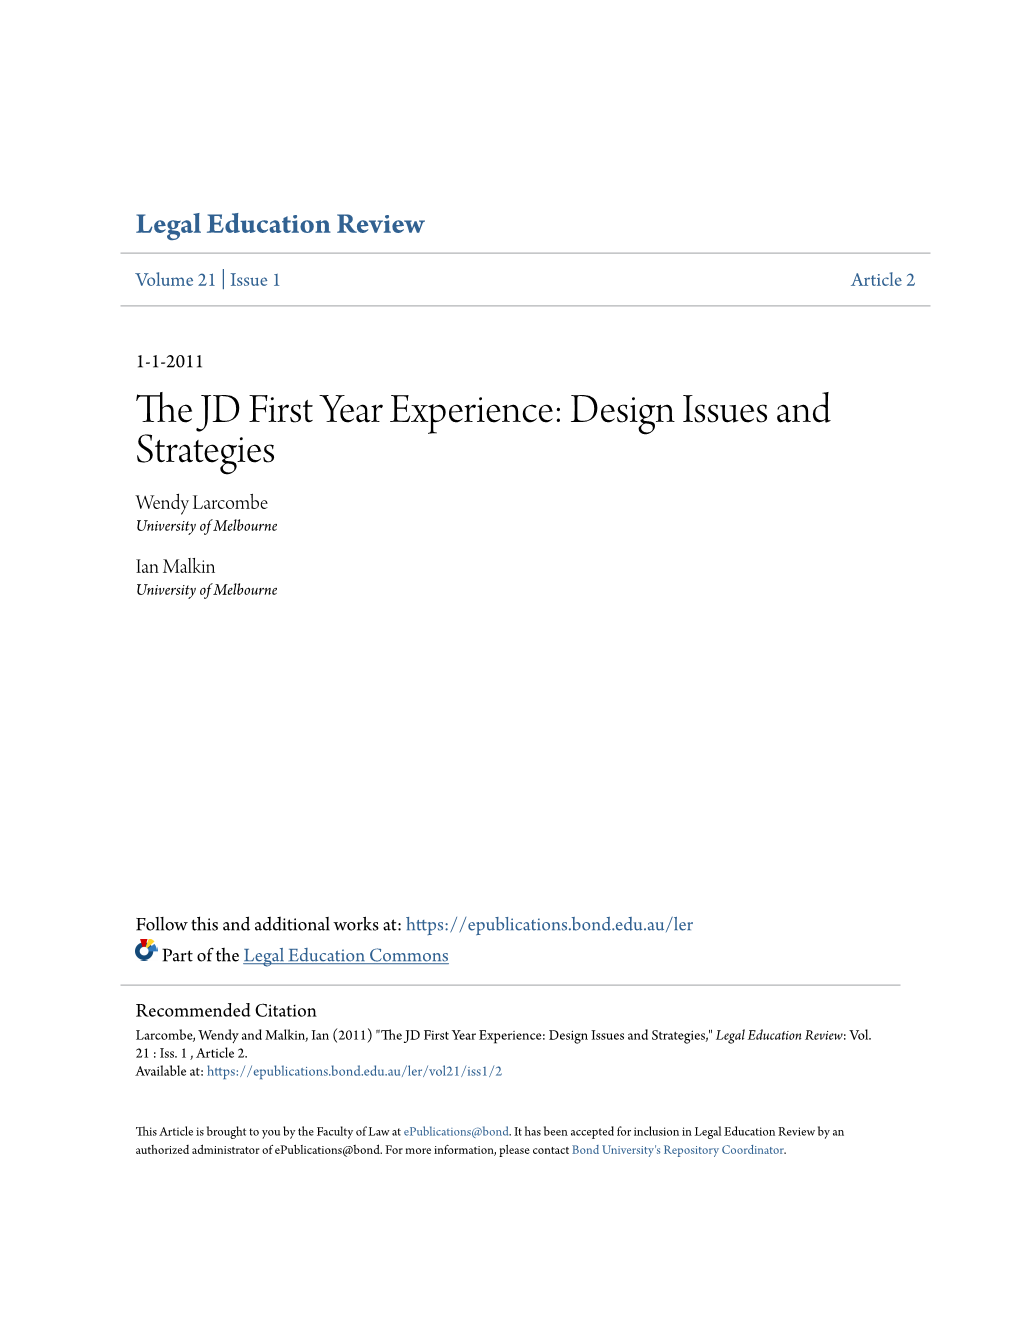 The JD First Year Experience: Design Issues and Strategies